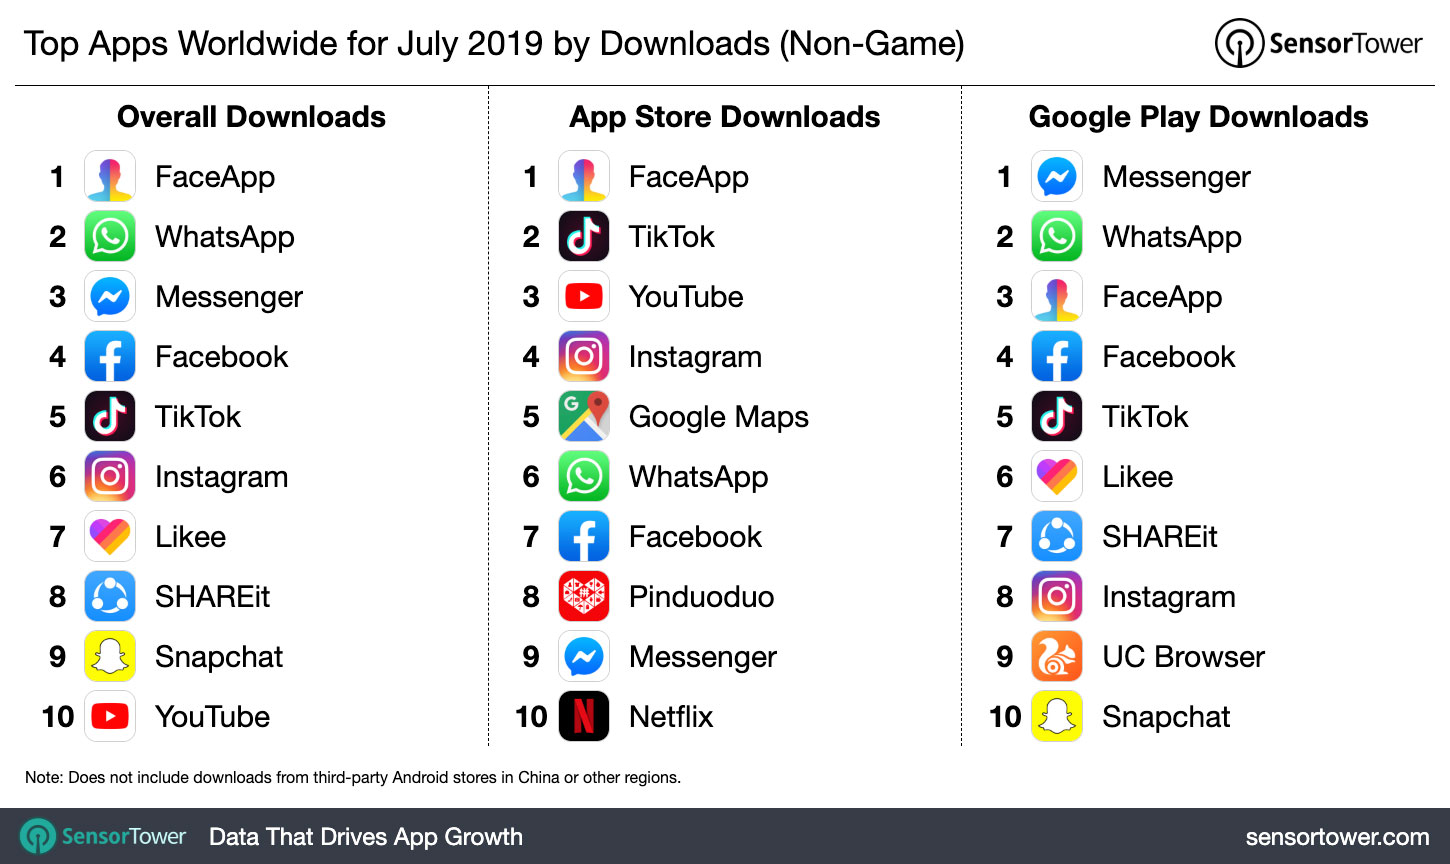 Top Apps Worldwide for July 2019 by Downloads